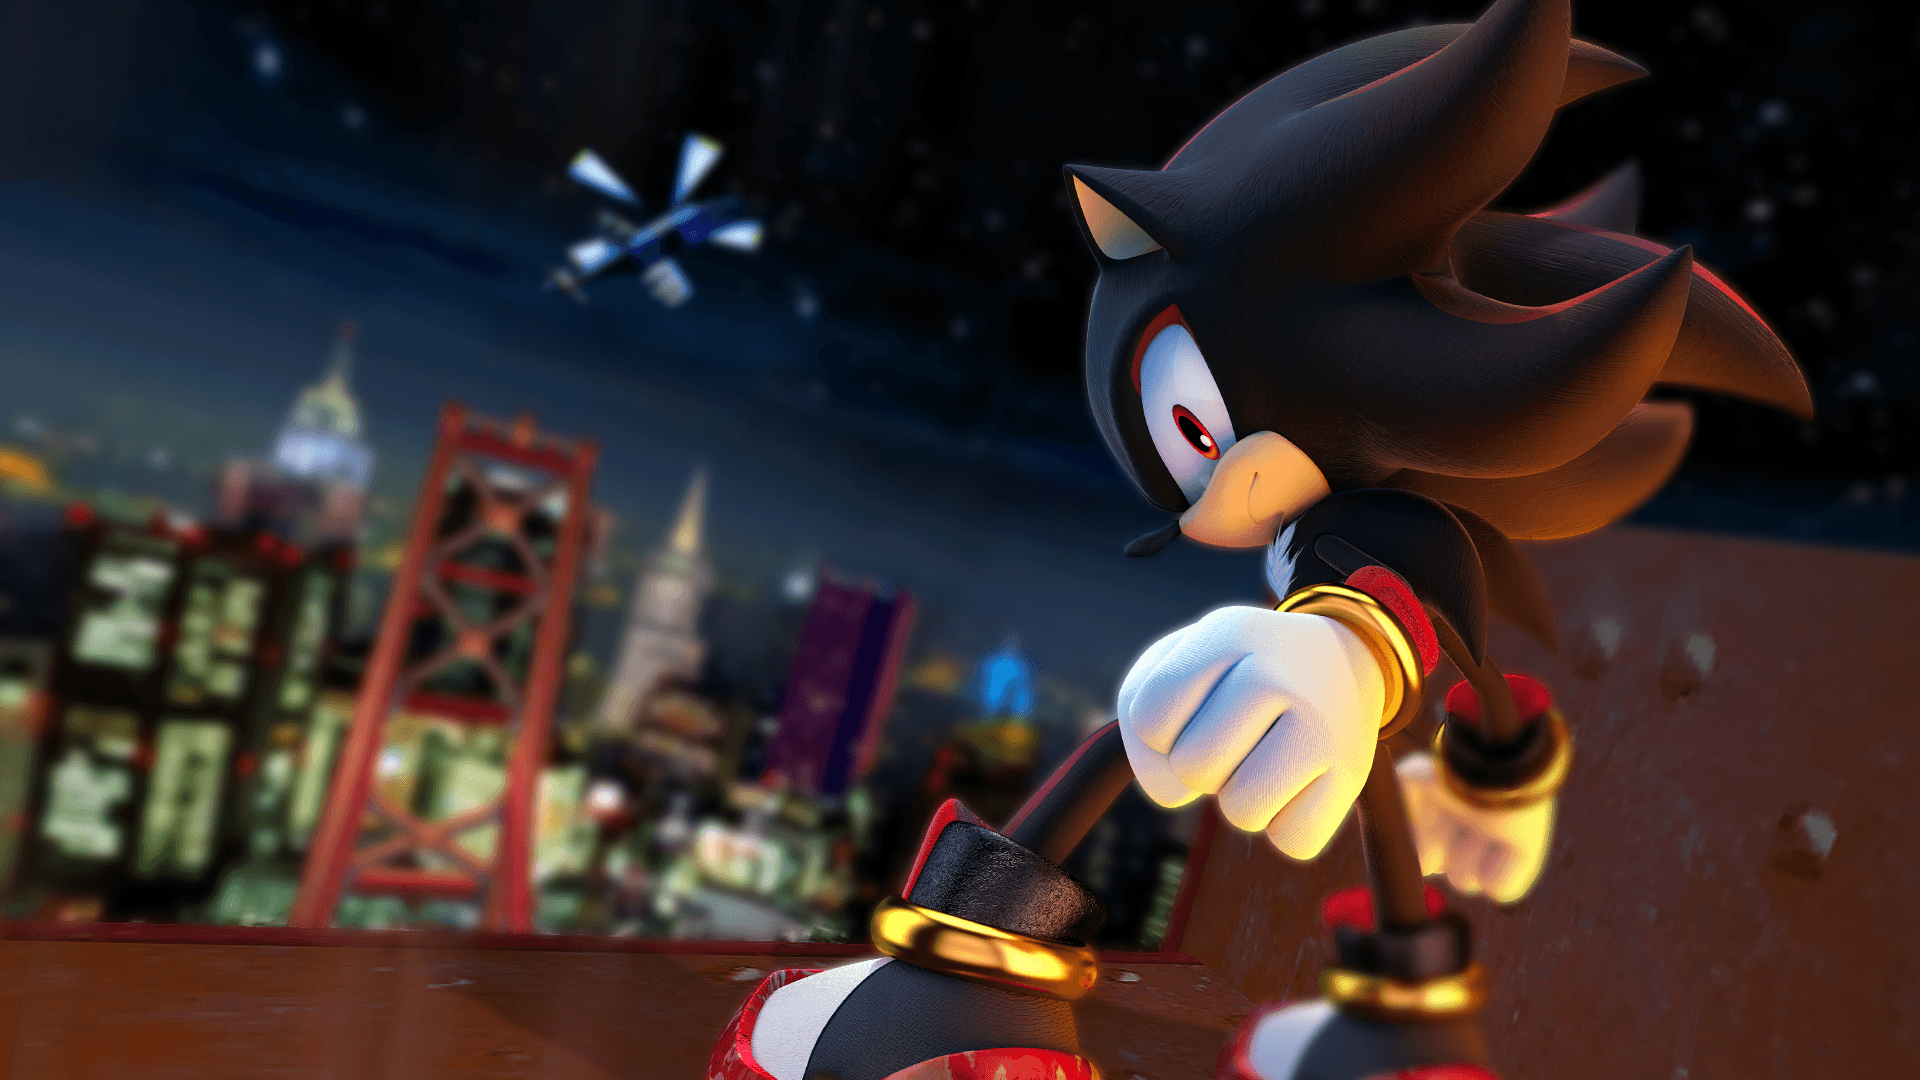 1920x1080 Shadow the Hedgehog Wallpapers Top Free Shadow the Hedgehog Backgrounds